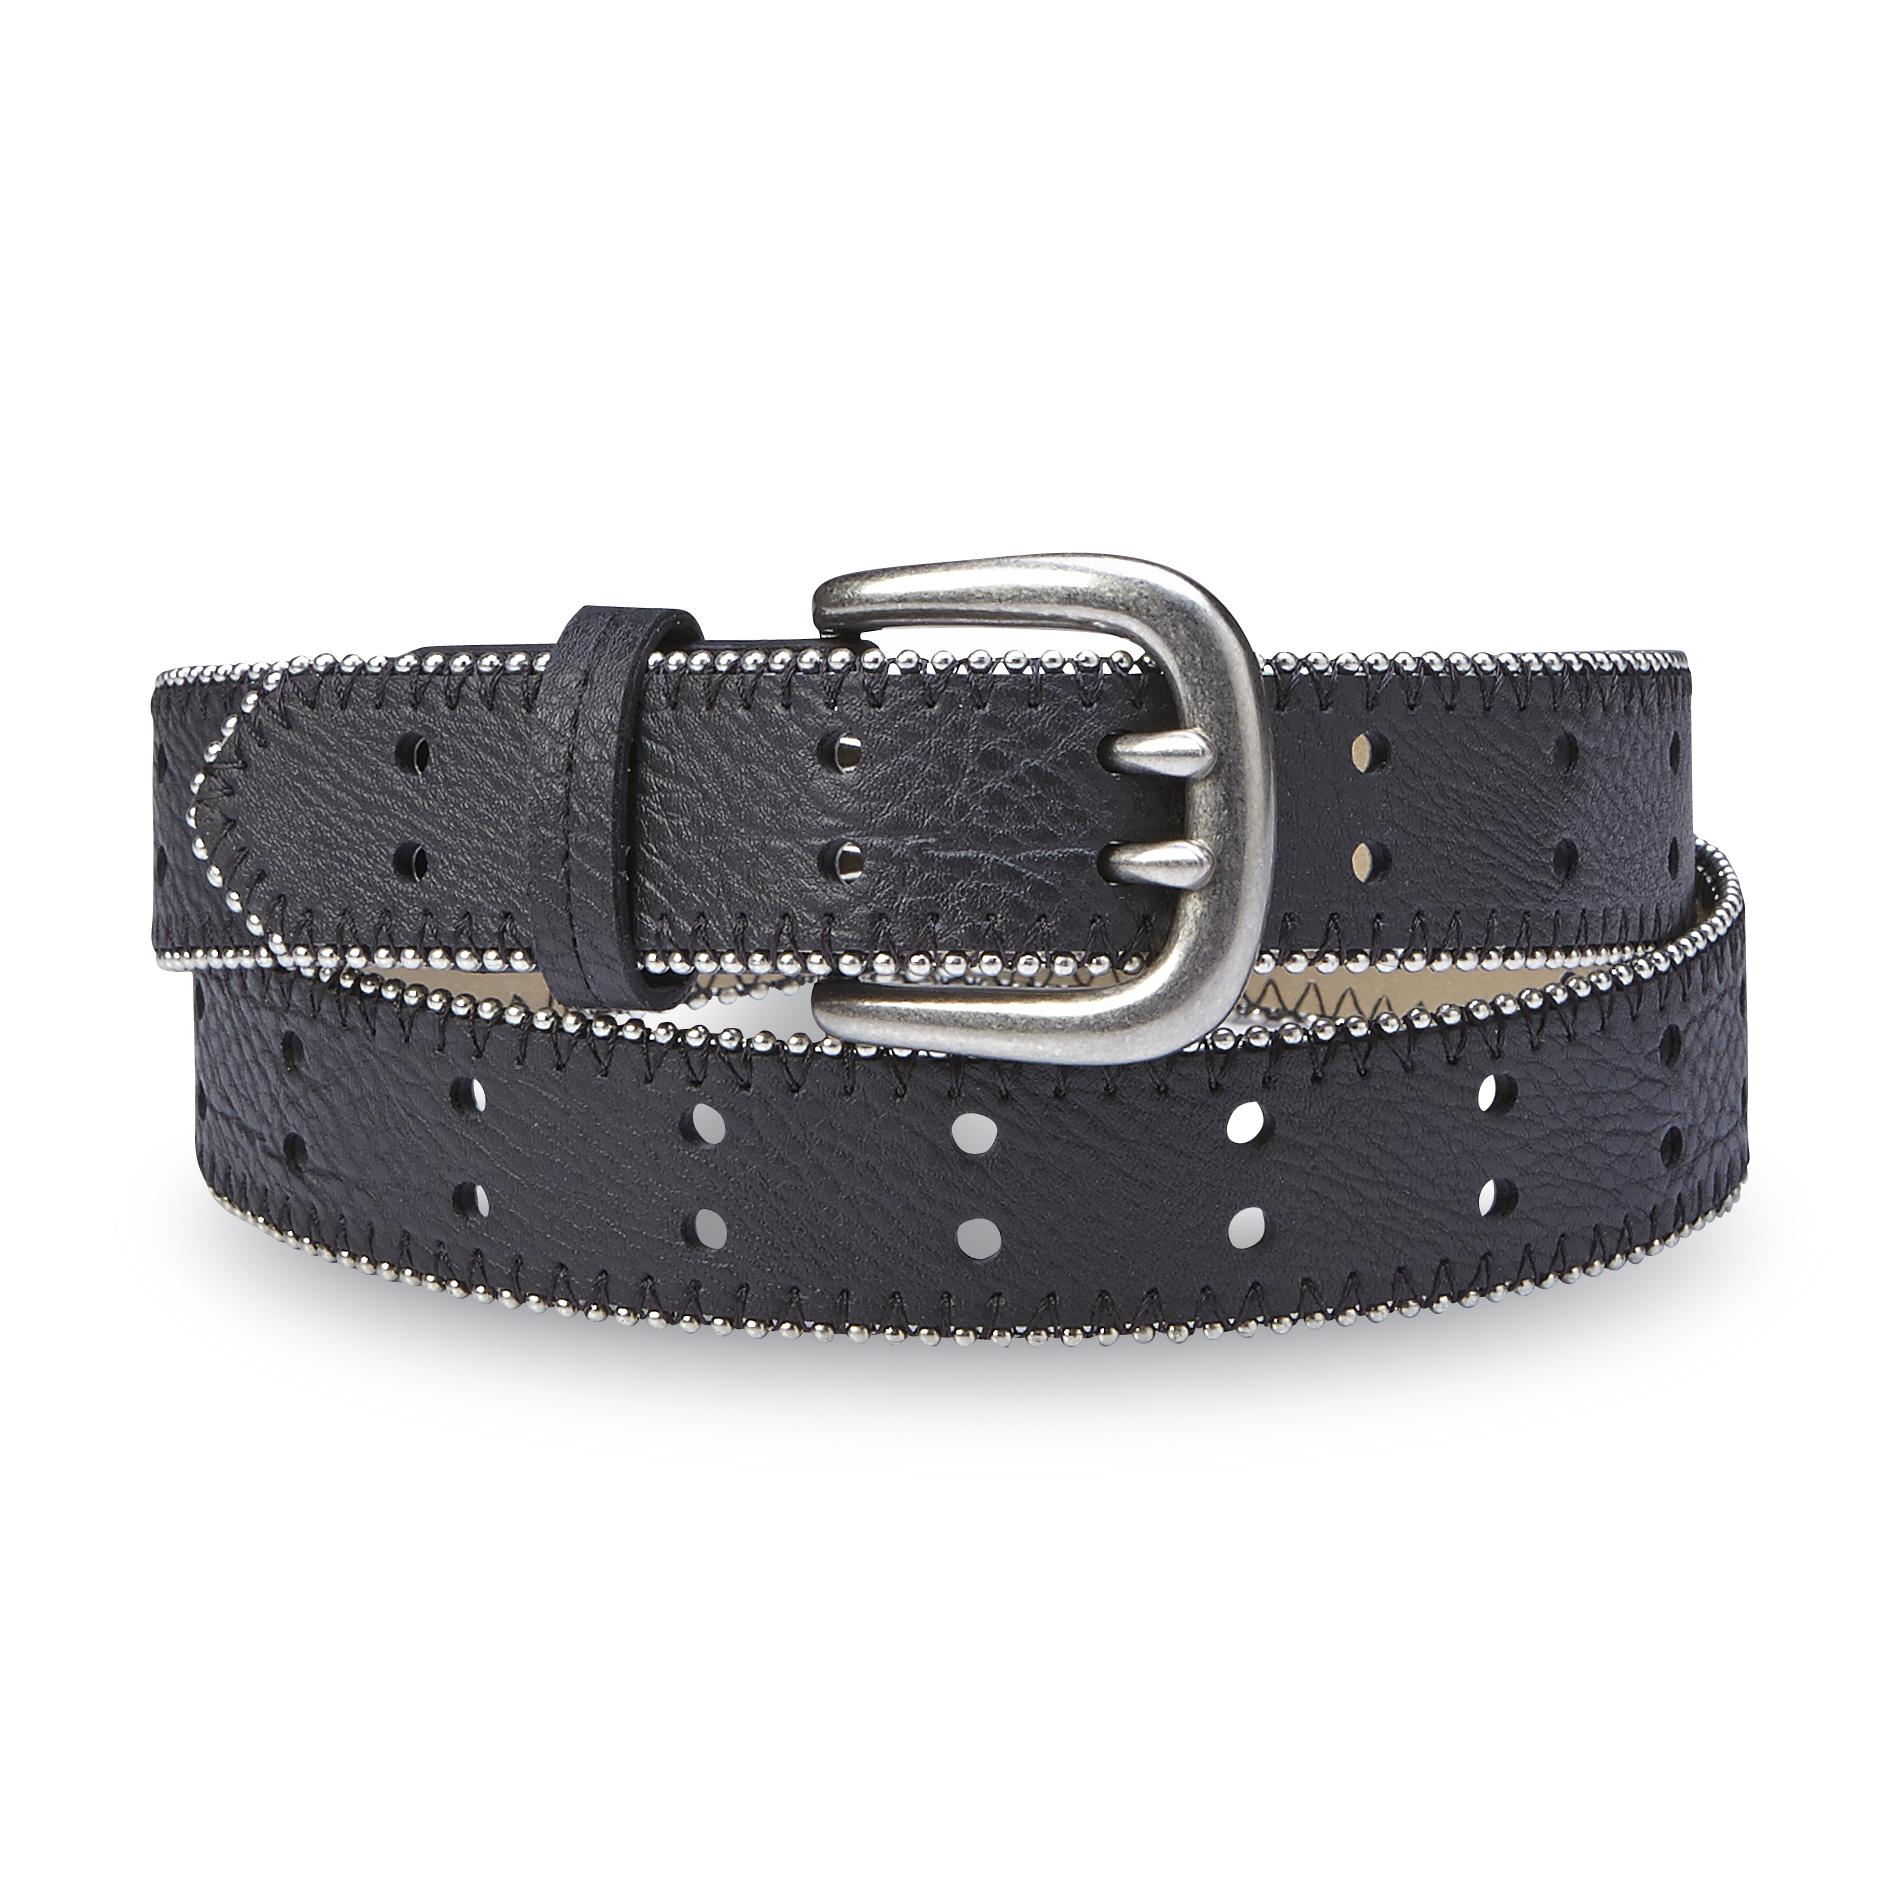 Relic Women's Double Prong Perforated Belt